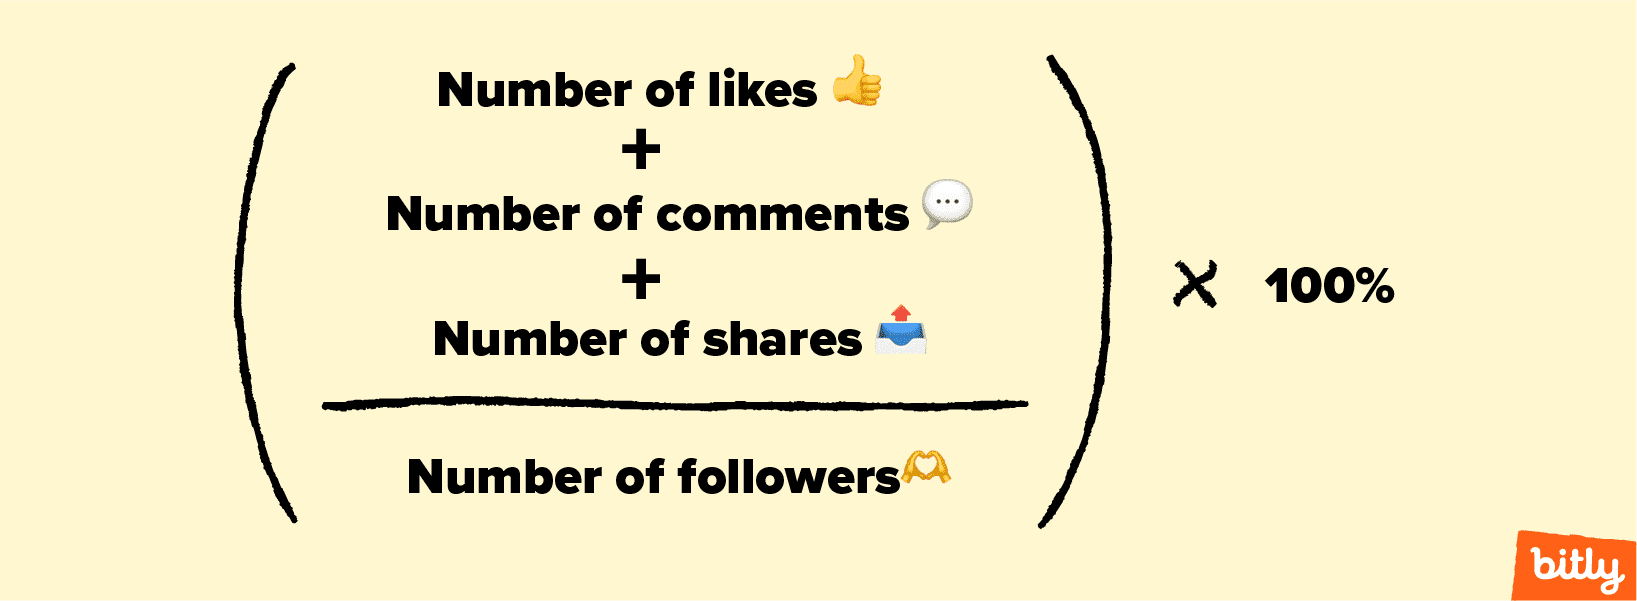 A formula for how to calculate percent engagement per follower on TikTok that includes the number of shares.